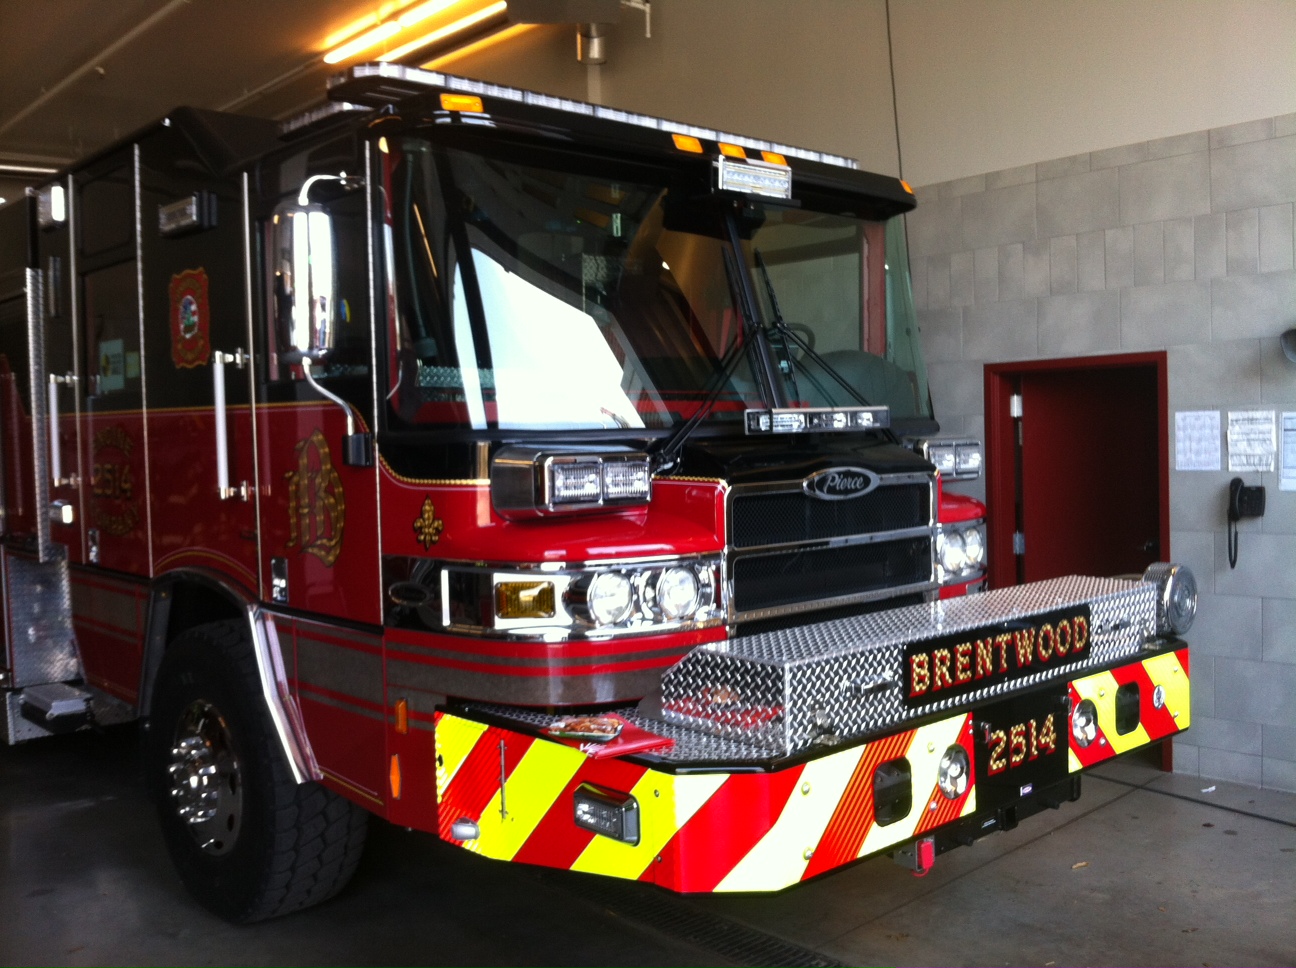 New fire truck delivered to Brentwood